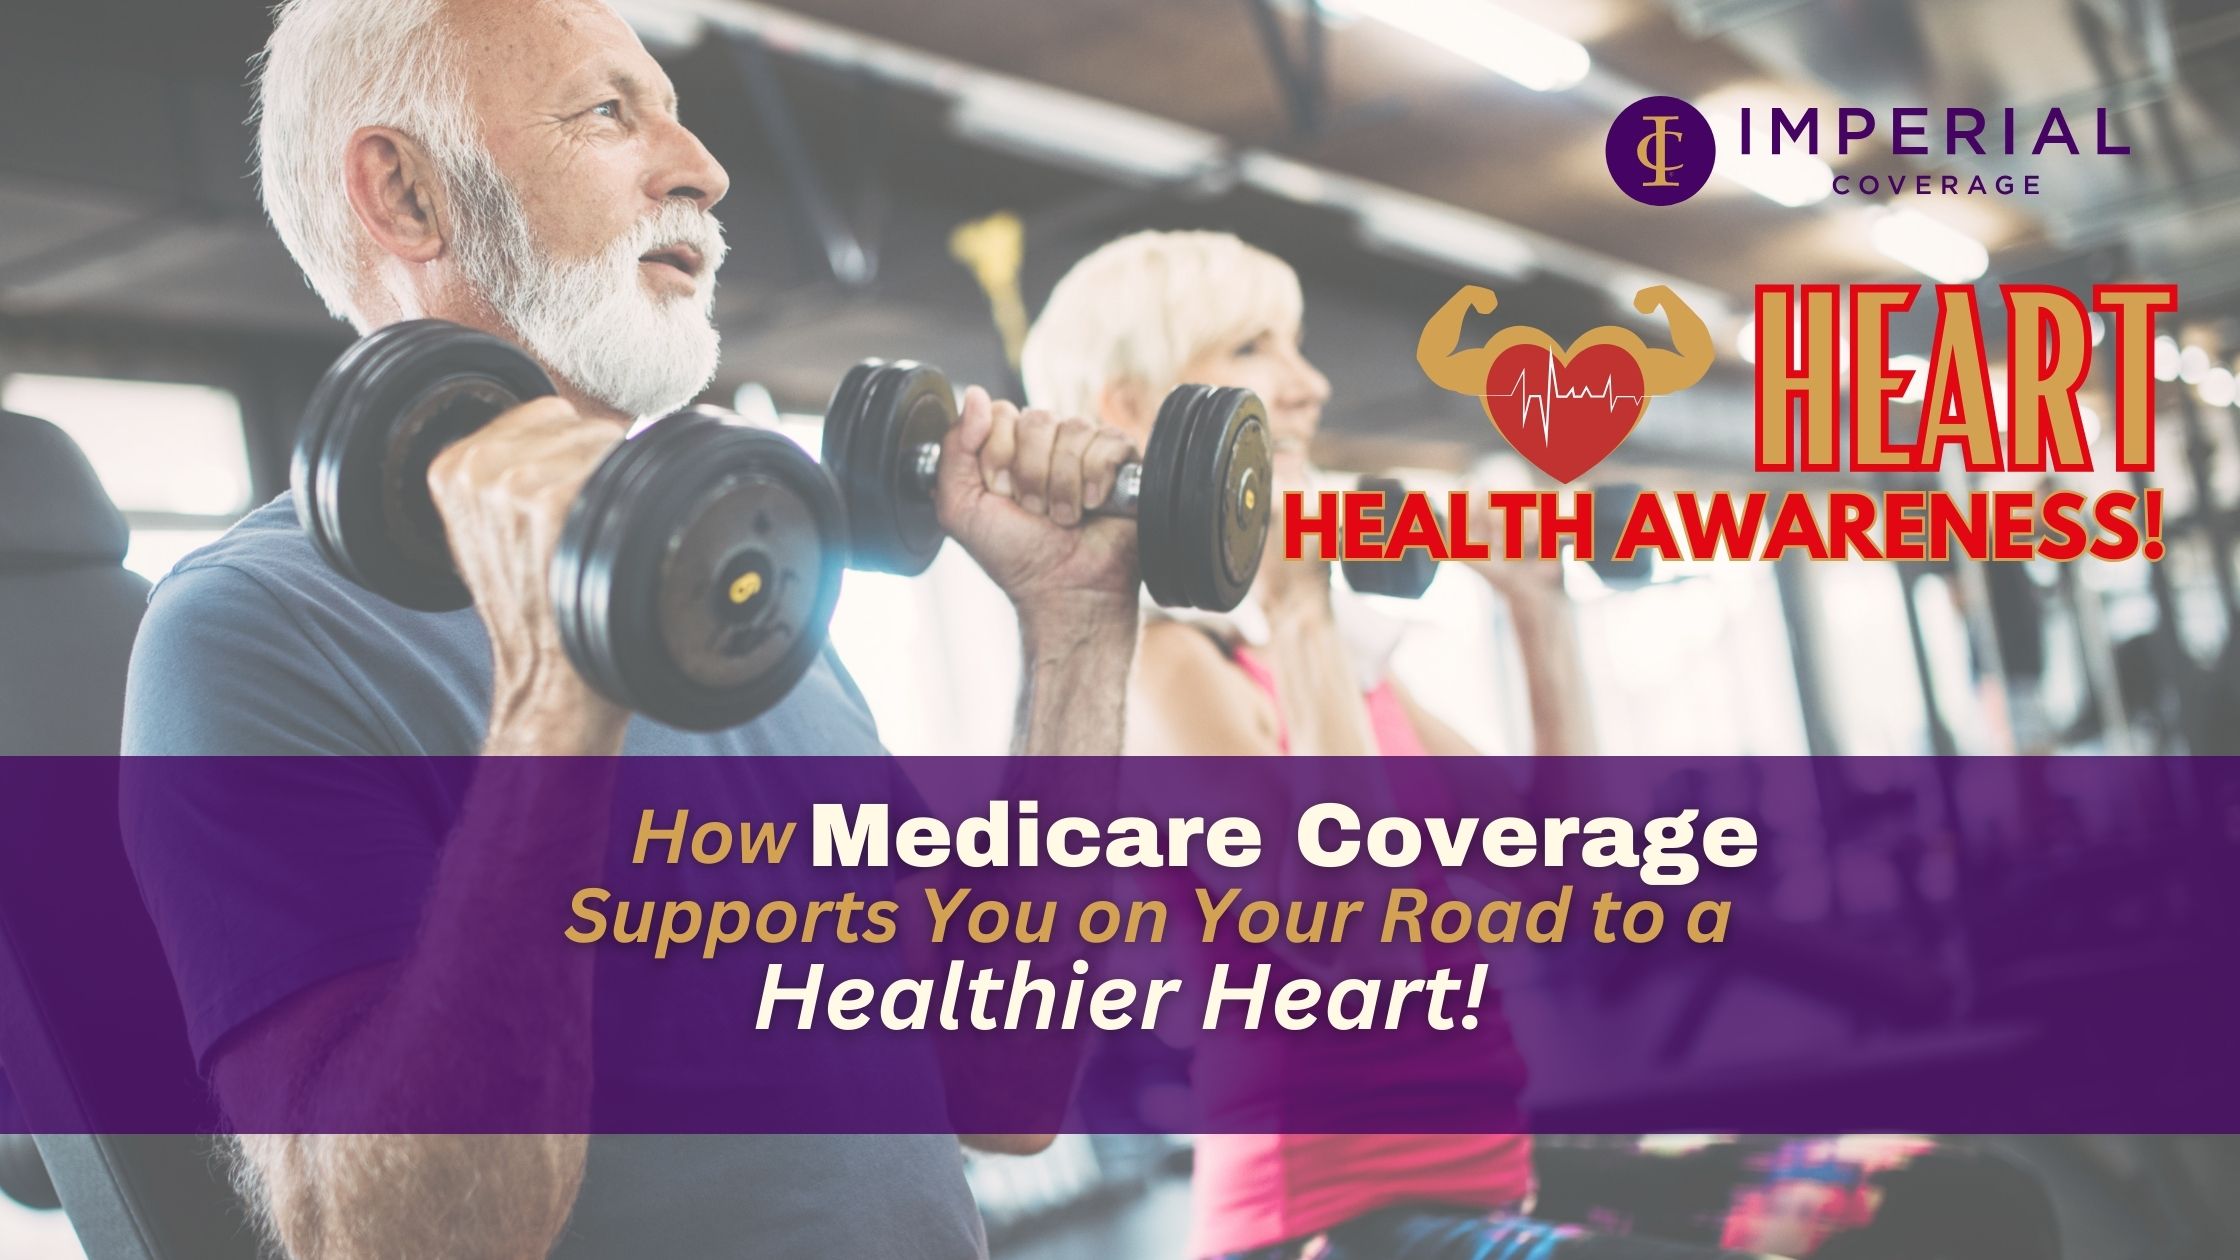 Empowering Hearts: Celebrating Cardiac Rehab Week & How Medicare Coverage Supports You on Your Road to a Healthier Heart!